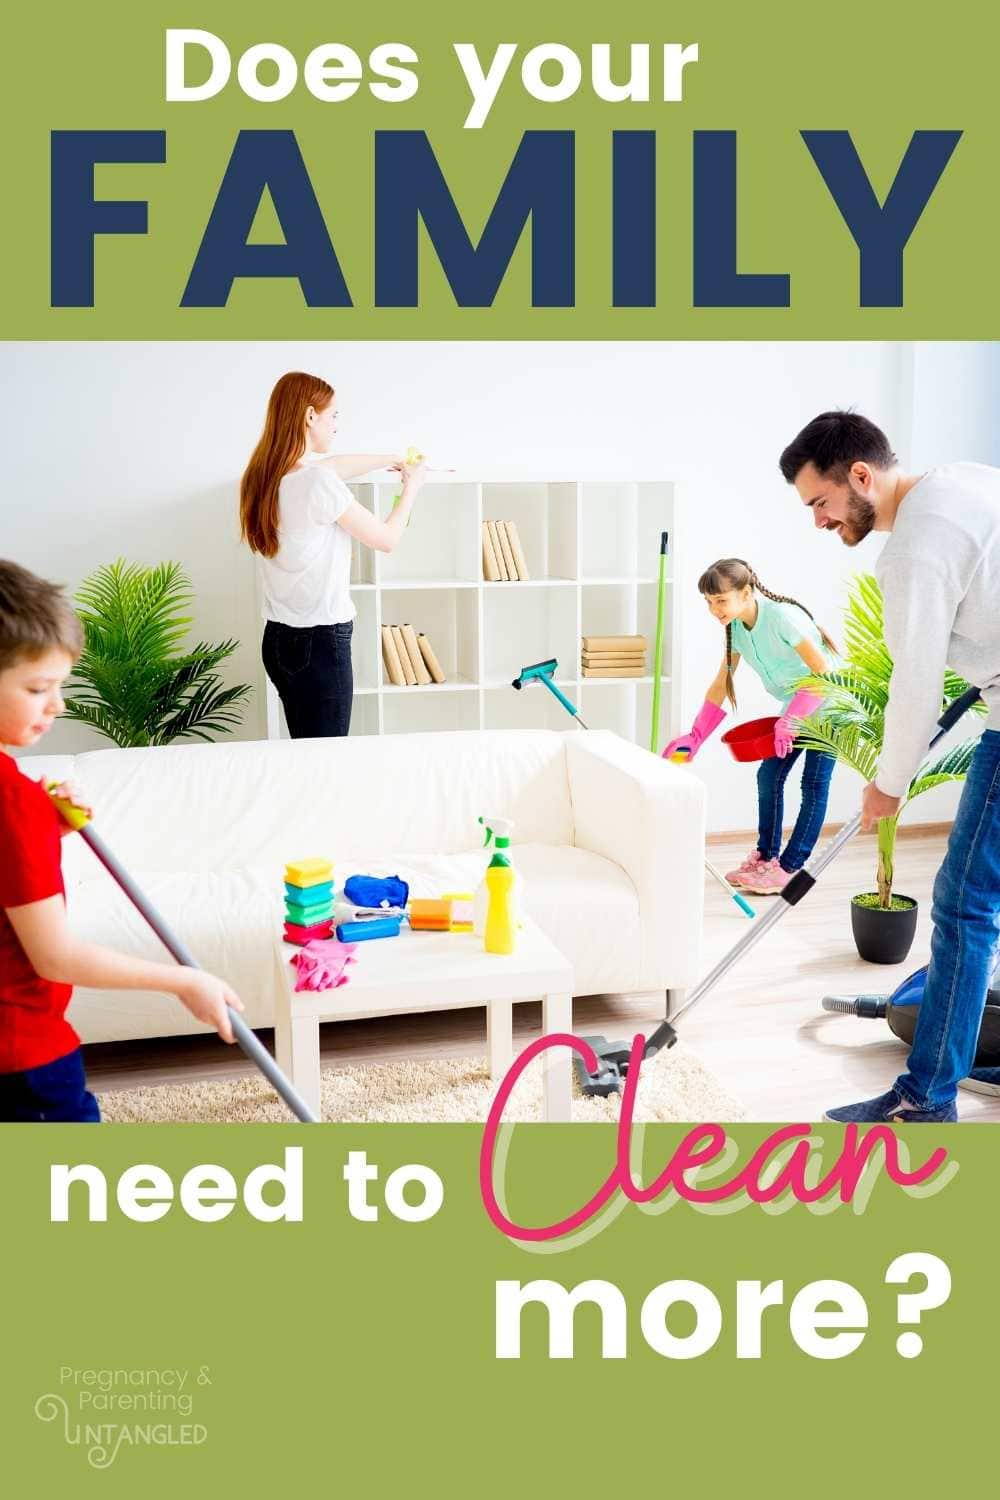 Wondering how your house could be cleaner, and you could also teach your kids valuable life skills that really make a difference as they grow up? There's an answer, but you might not like it. via @pullingcurls